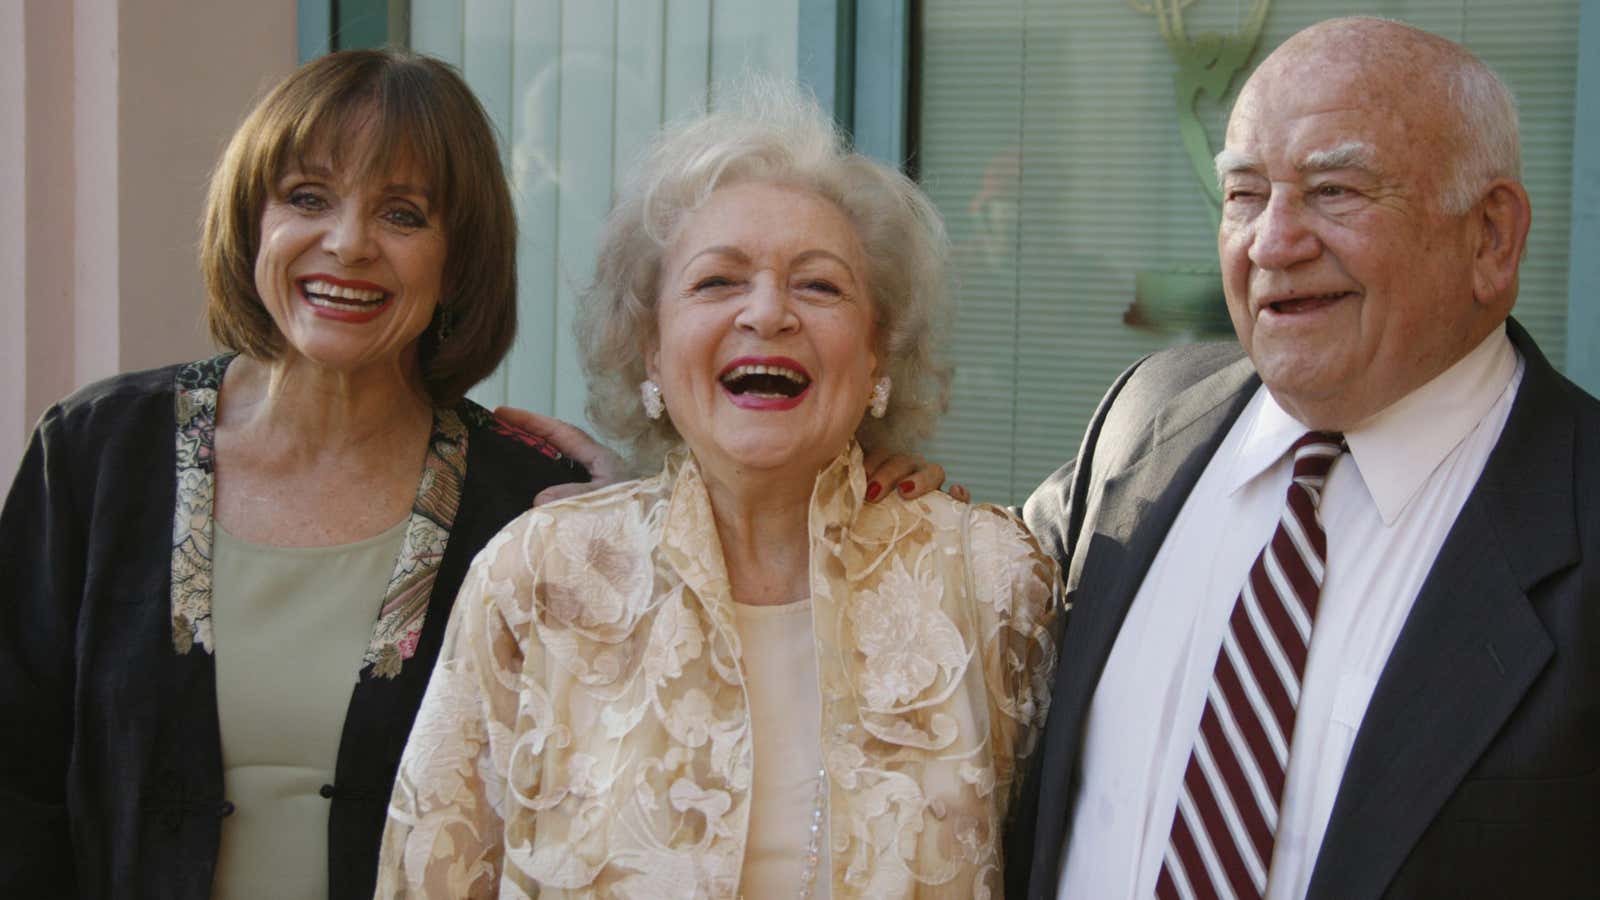 Ed Asner with his former “Mary Tyler Moore” castmates Betty White and Valerie Harper.